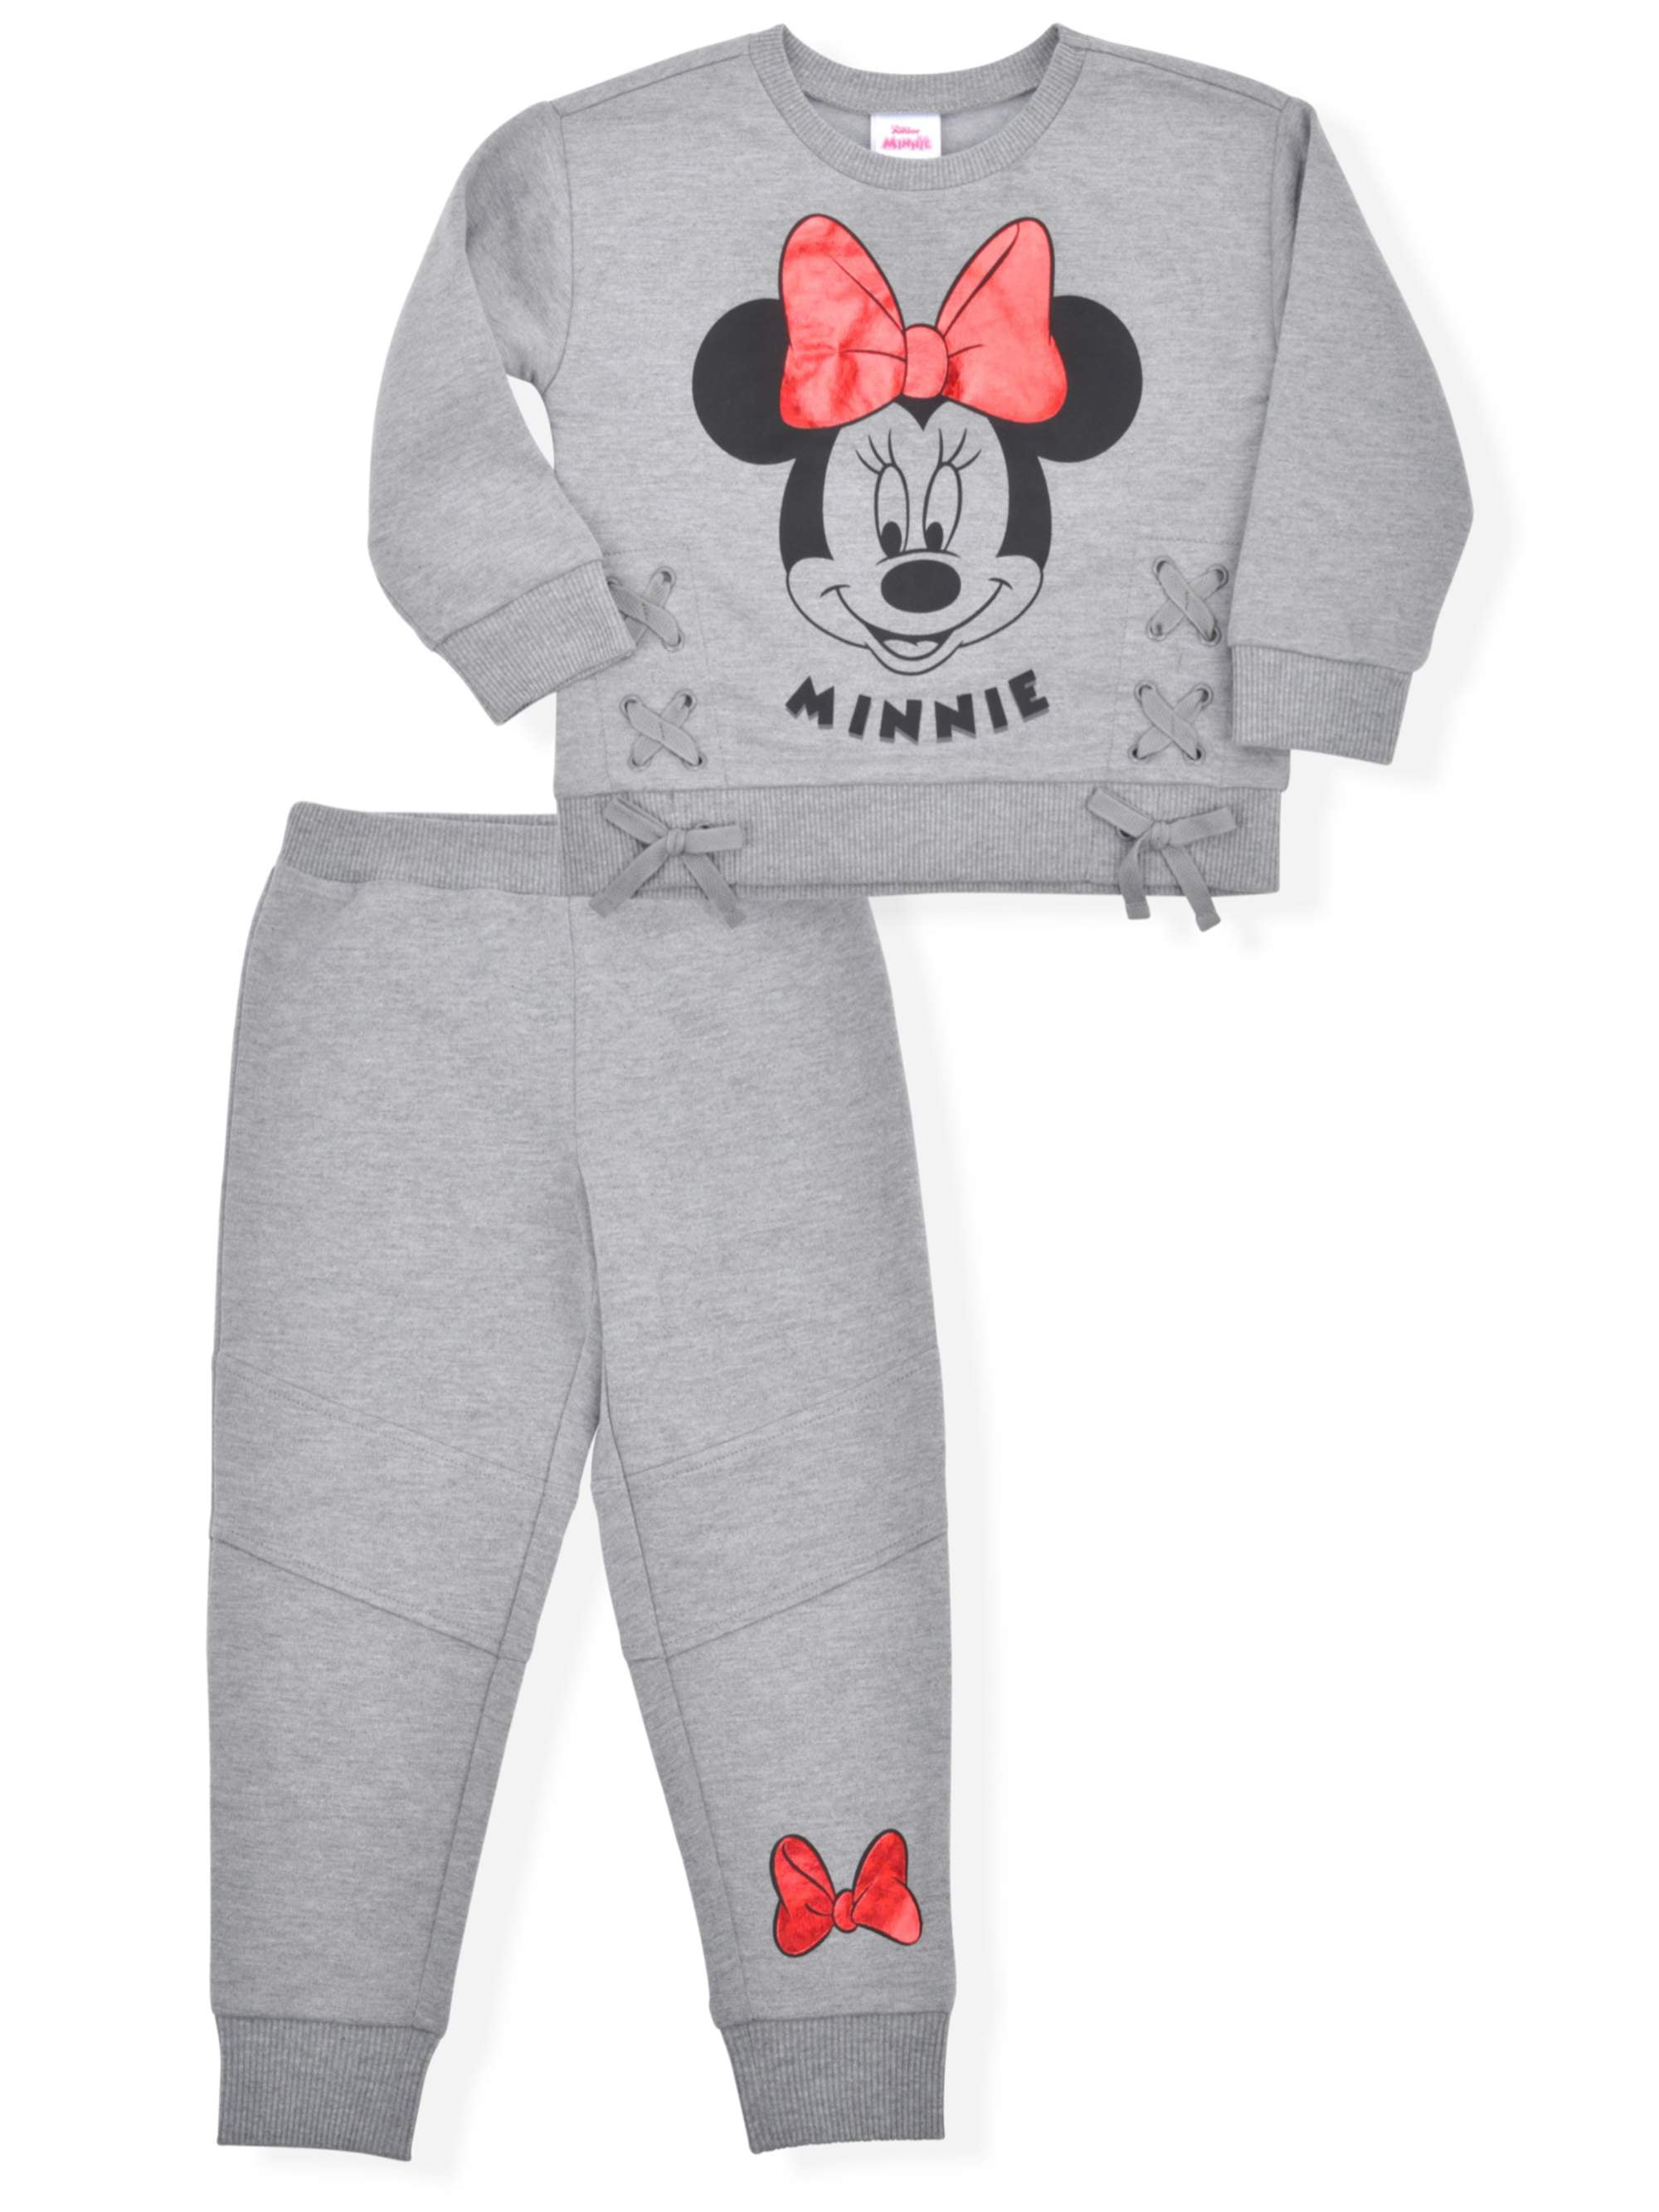 Disney Minnie Mouse Baby Girls Tracksuit Outfit Clothes Set VELVET 3-24 Months 